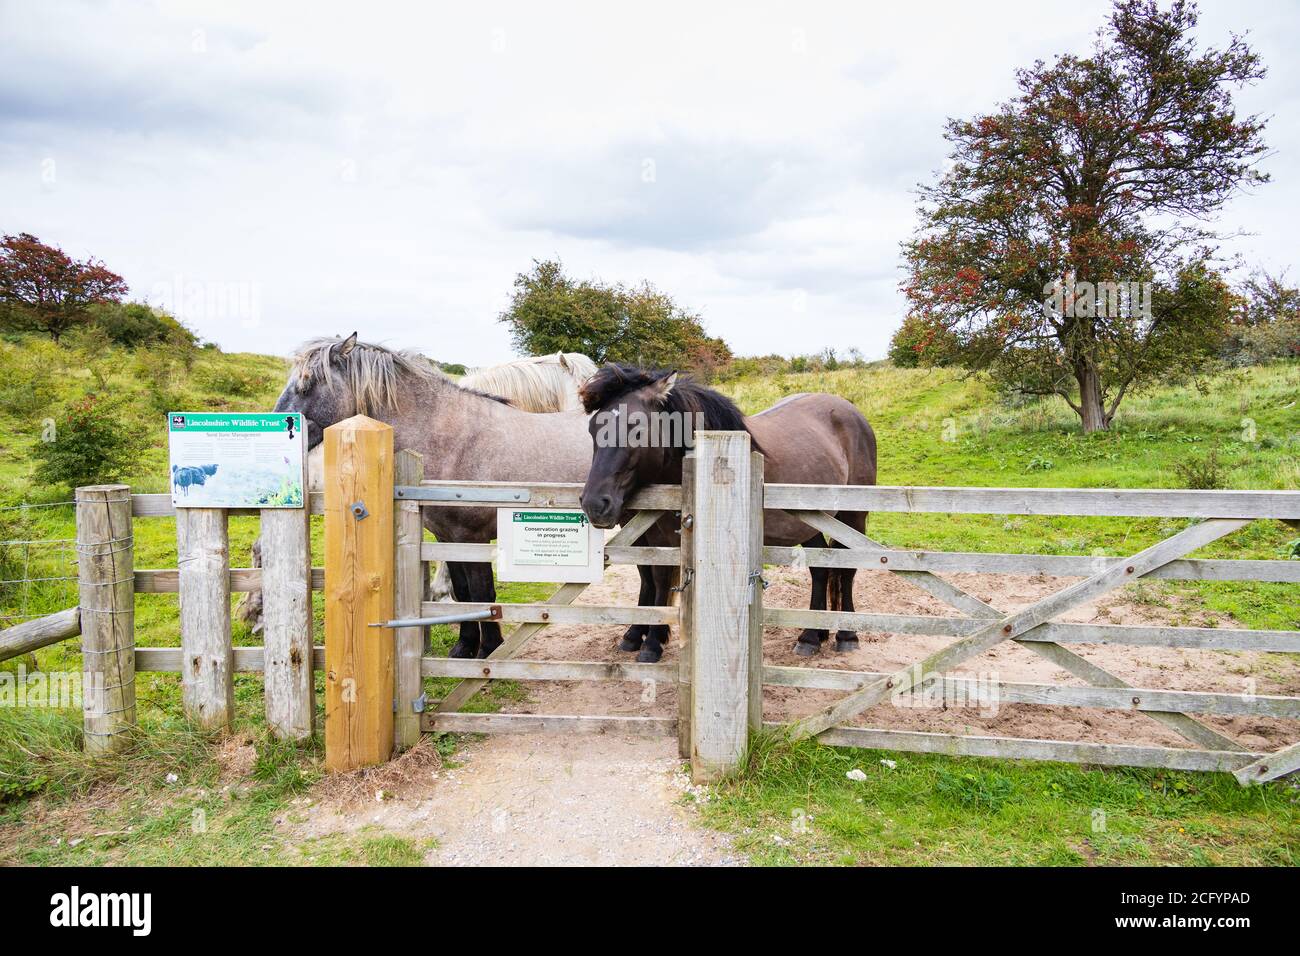 Highland ponies brought in to graze the grasses at Gibraltar point nature Reserve, near Skegness, Lincolnshire, England. Stock Photo